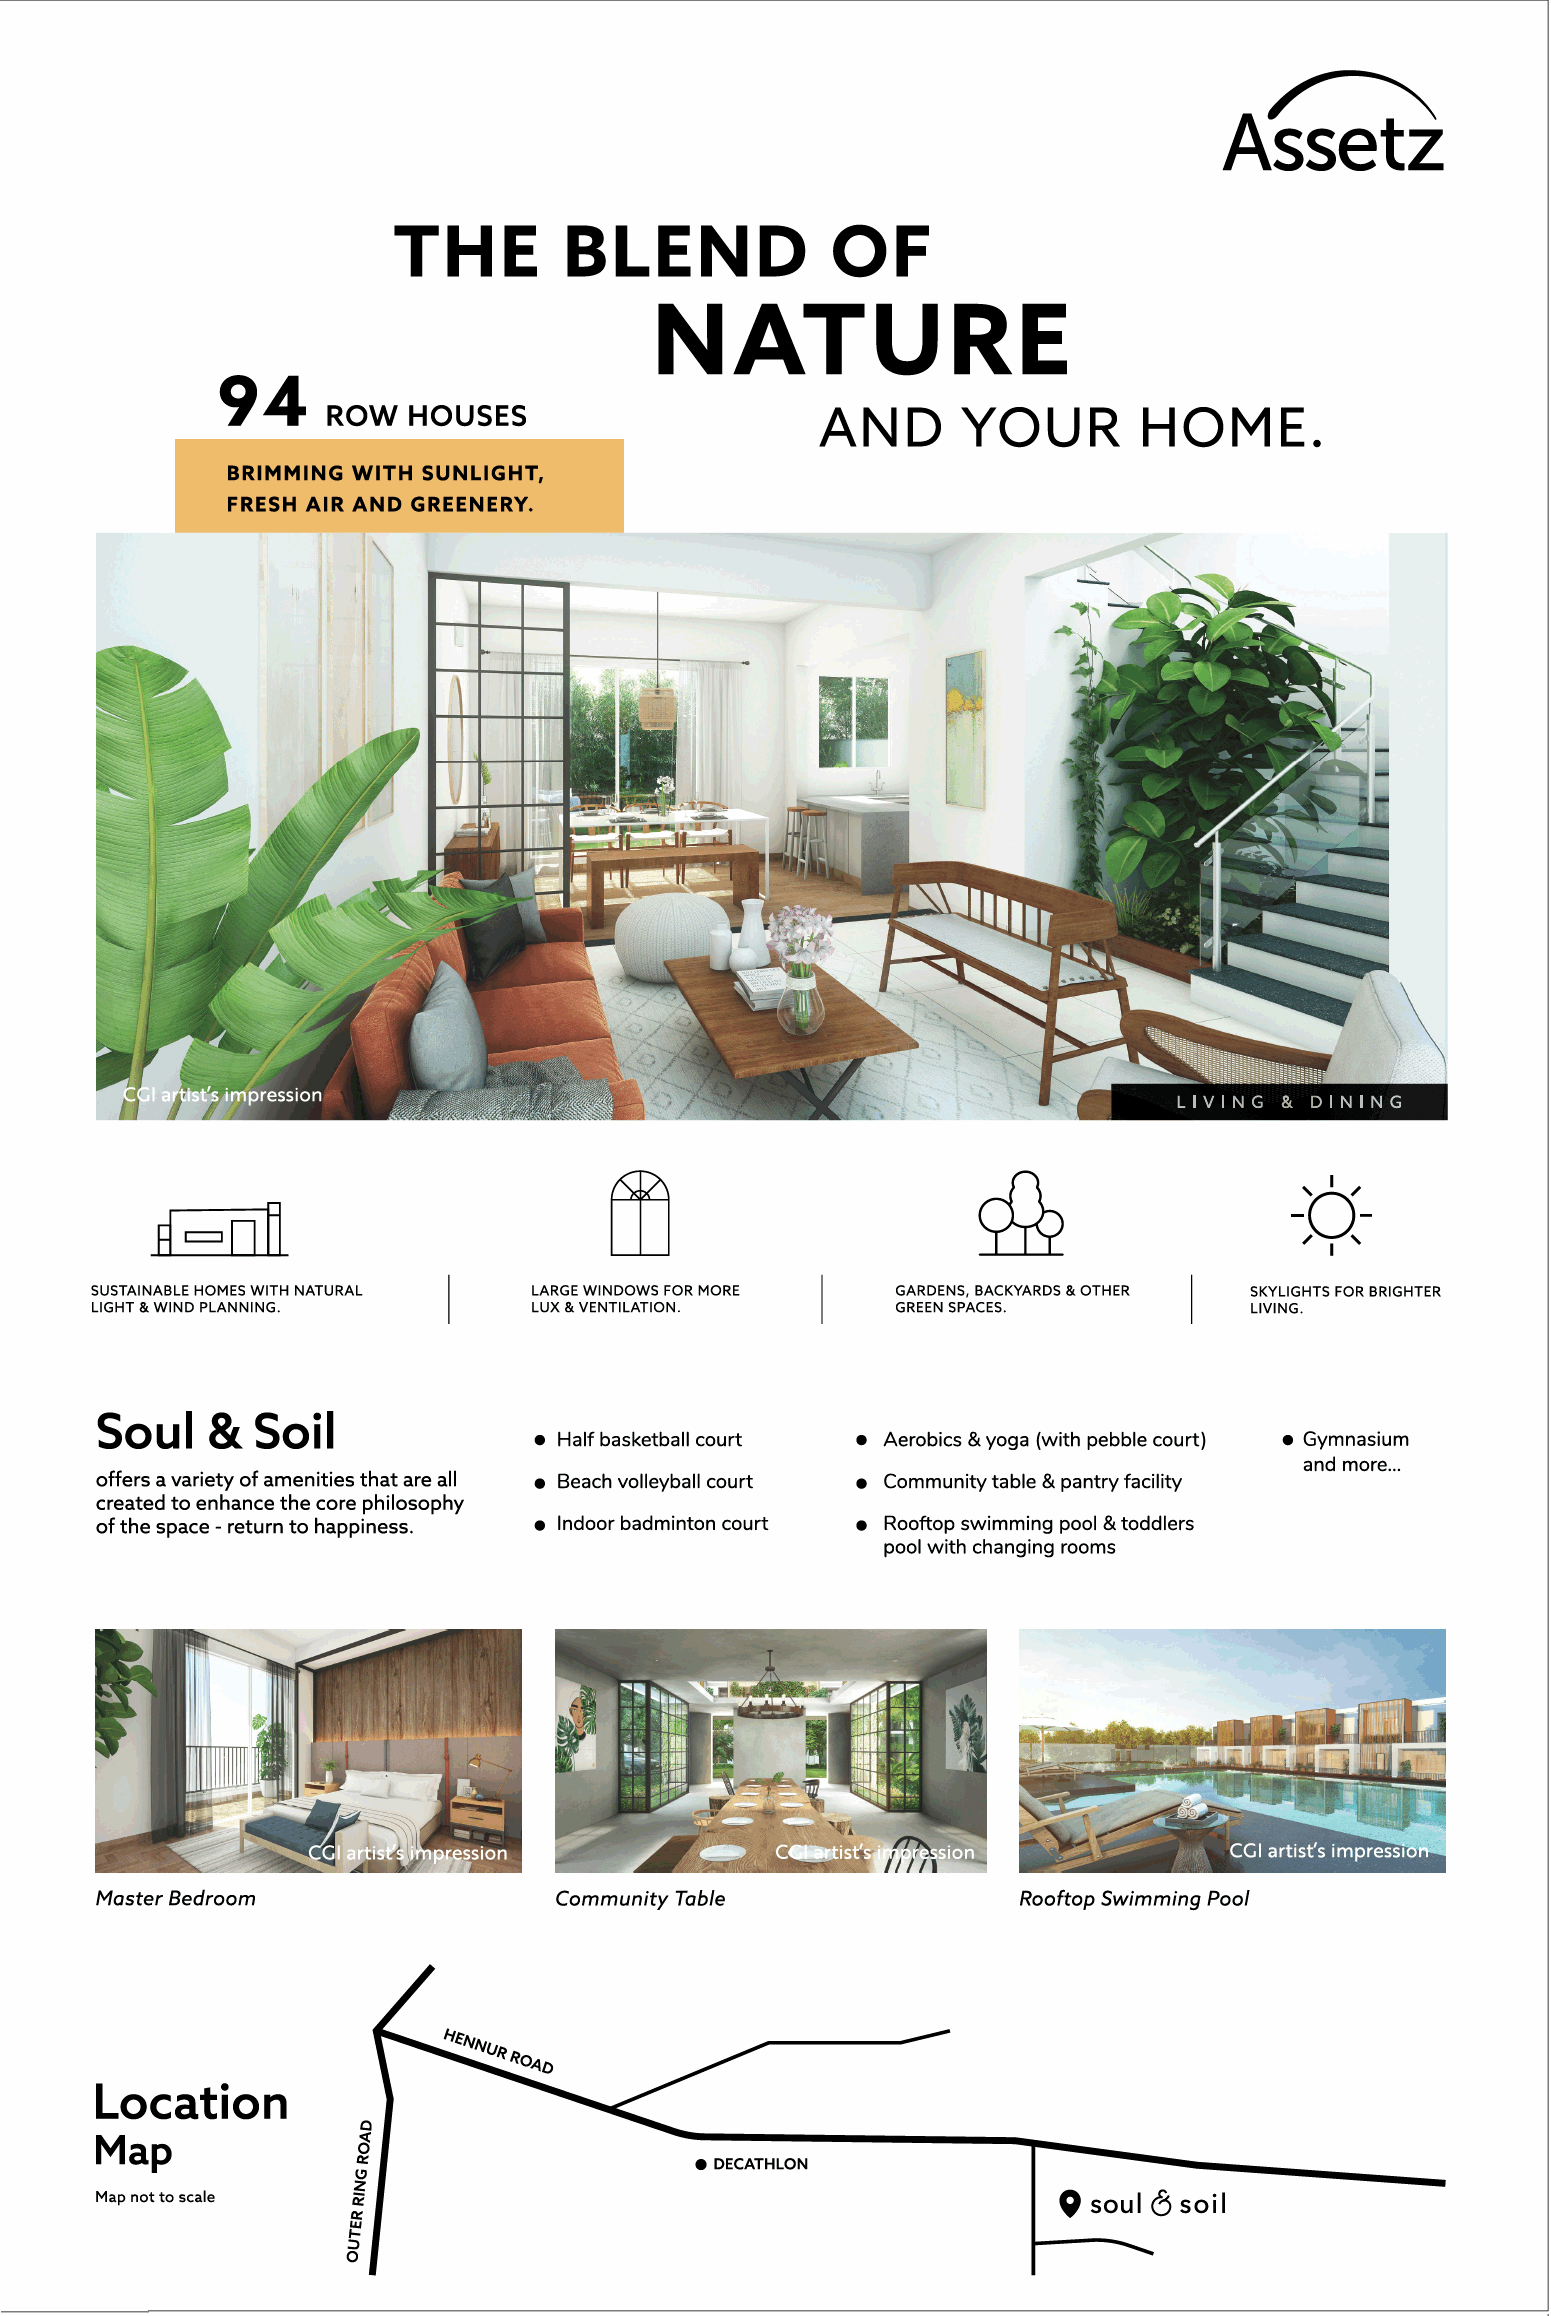 Book the blend of nature & your home at Assetz Soul & Soil in Bangalore Update